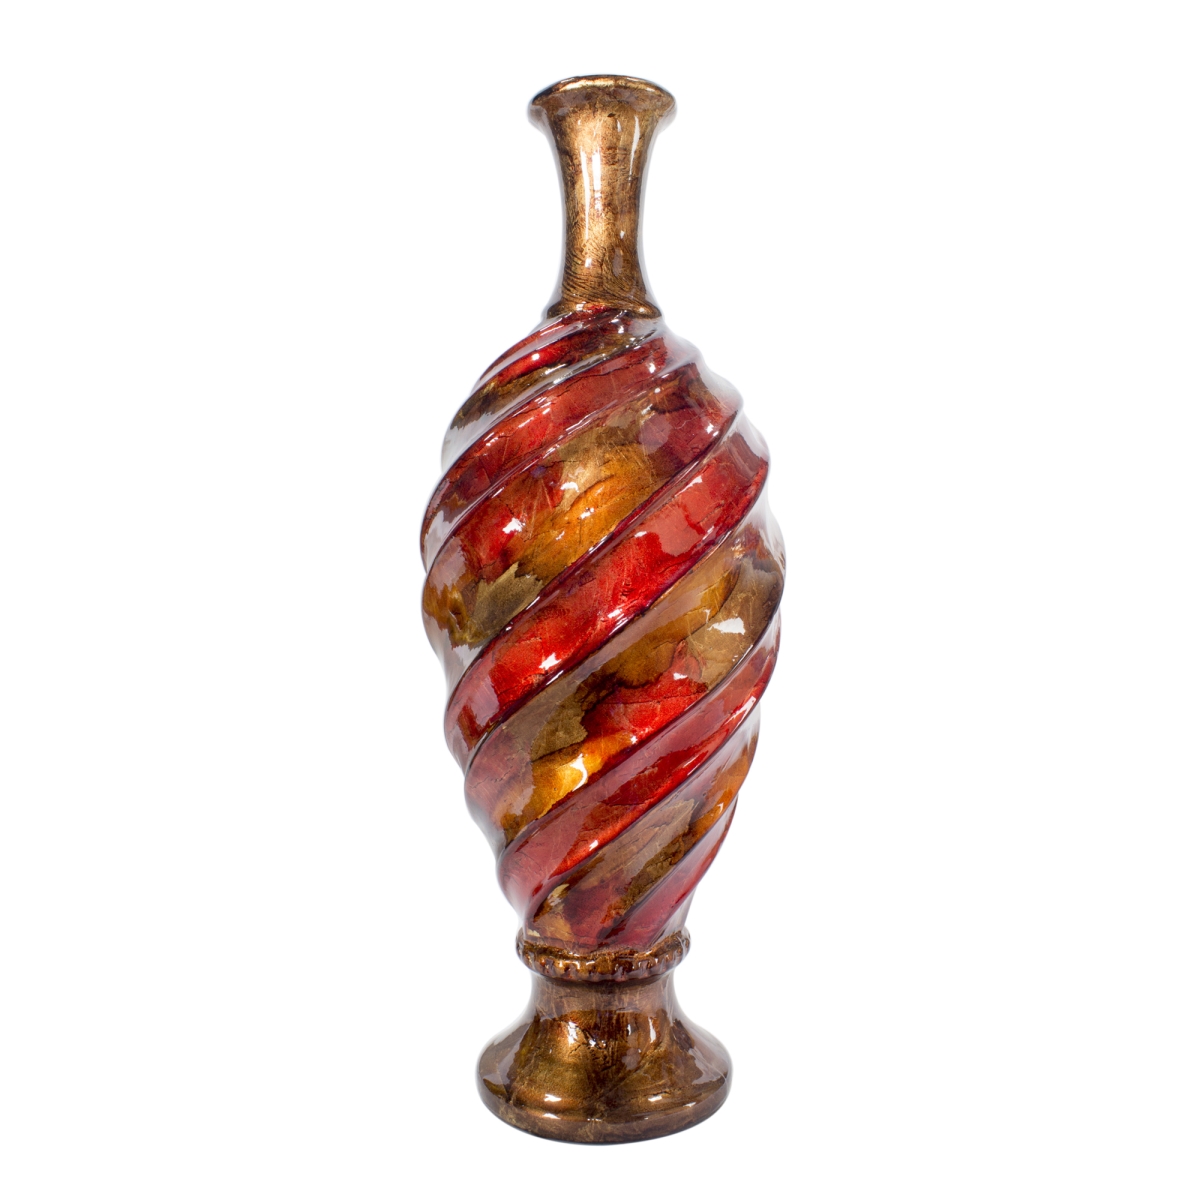 W085052-06 Twist Foiled & Lacquered Ceramic Turned & Ridged Bud Vase, Red & Brown